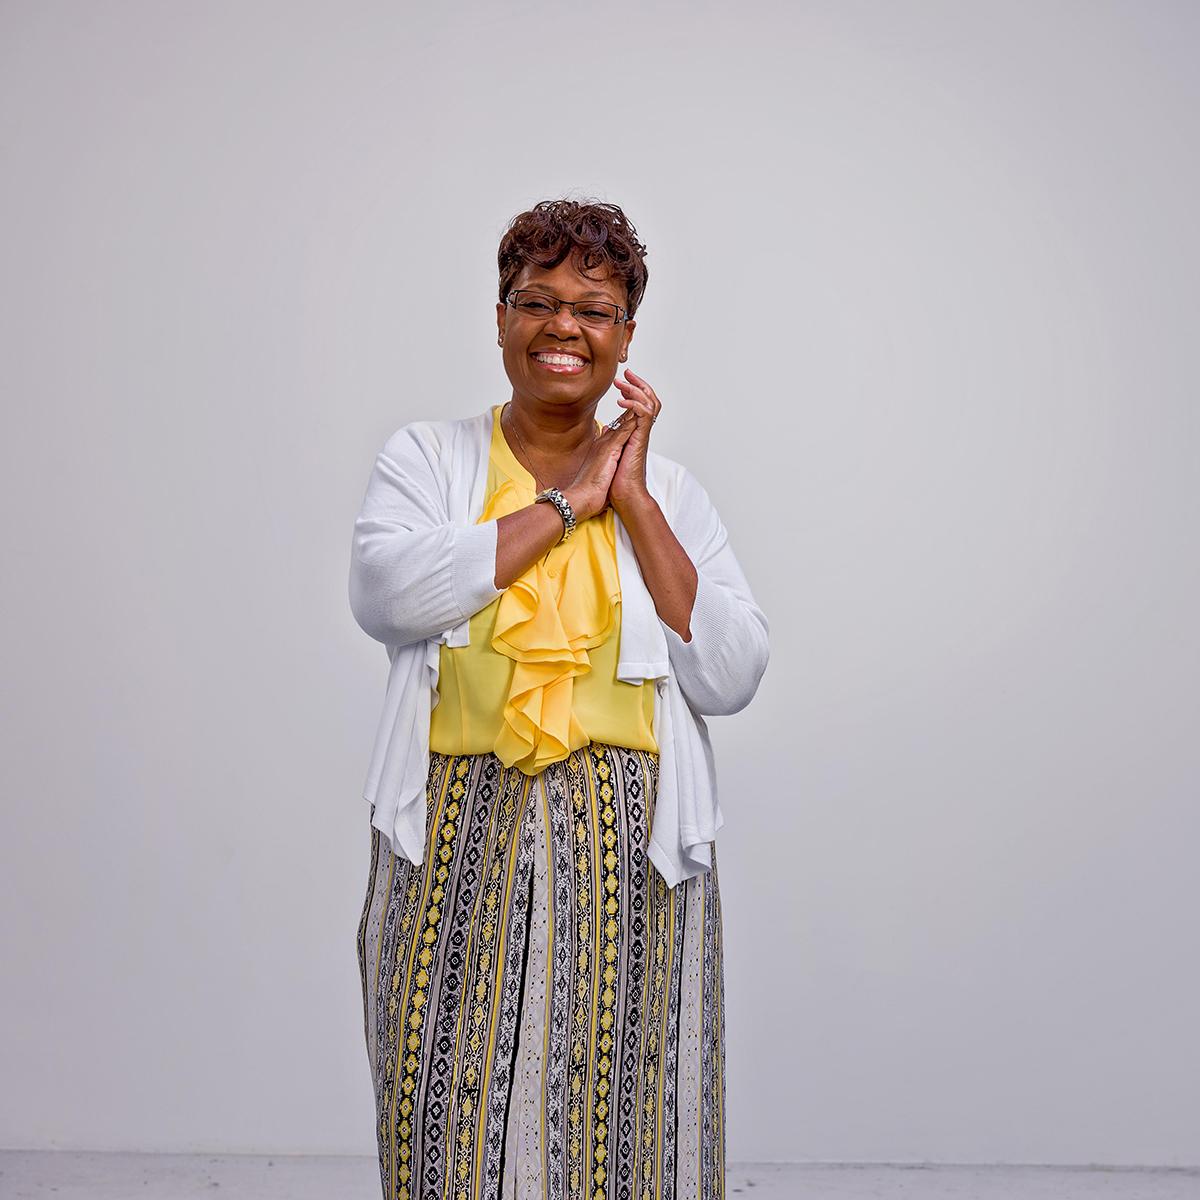 Photo of Rita Armstrong, a smiling Black woman with glasses and short hair, wearing a yellow blouse and colorful skirt